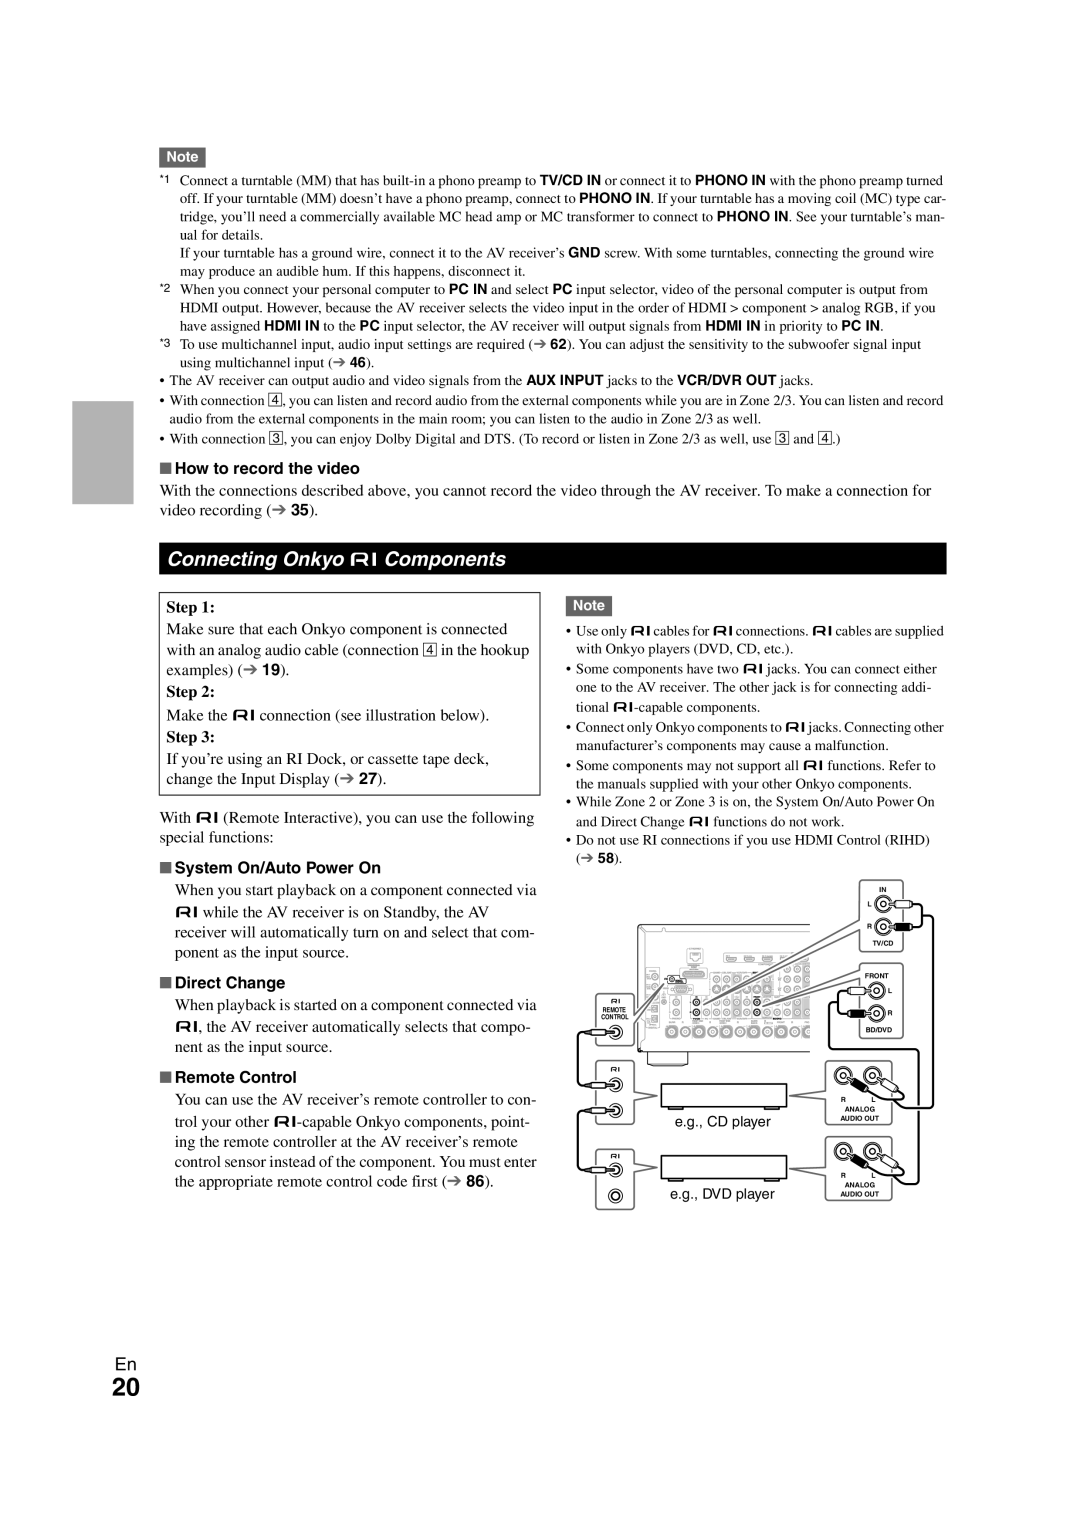 Onkyo TX-NR1008 instruction manual Connecting Onkyo uComponents, How to record the video, Direct Change, Remote Control 